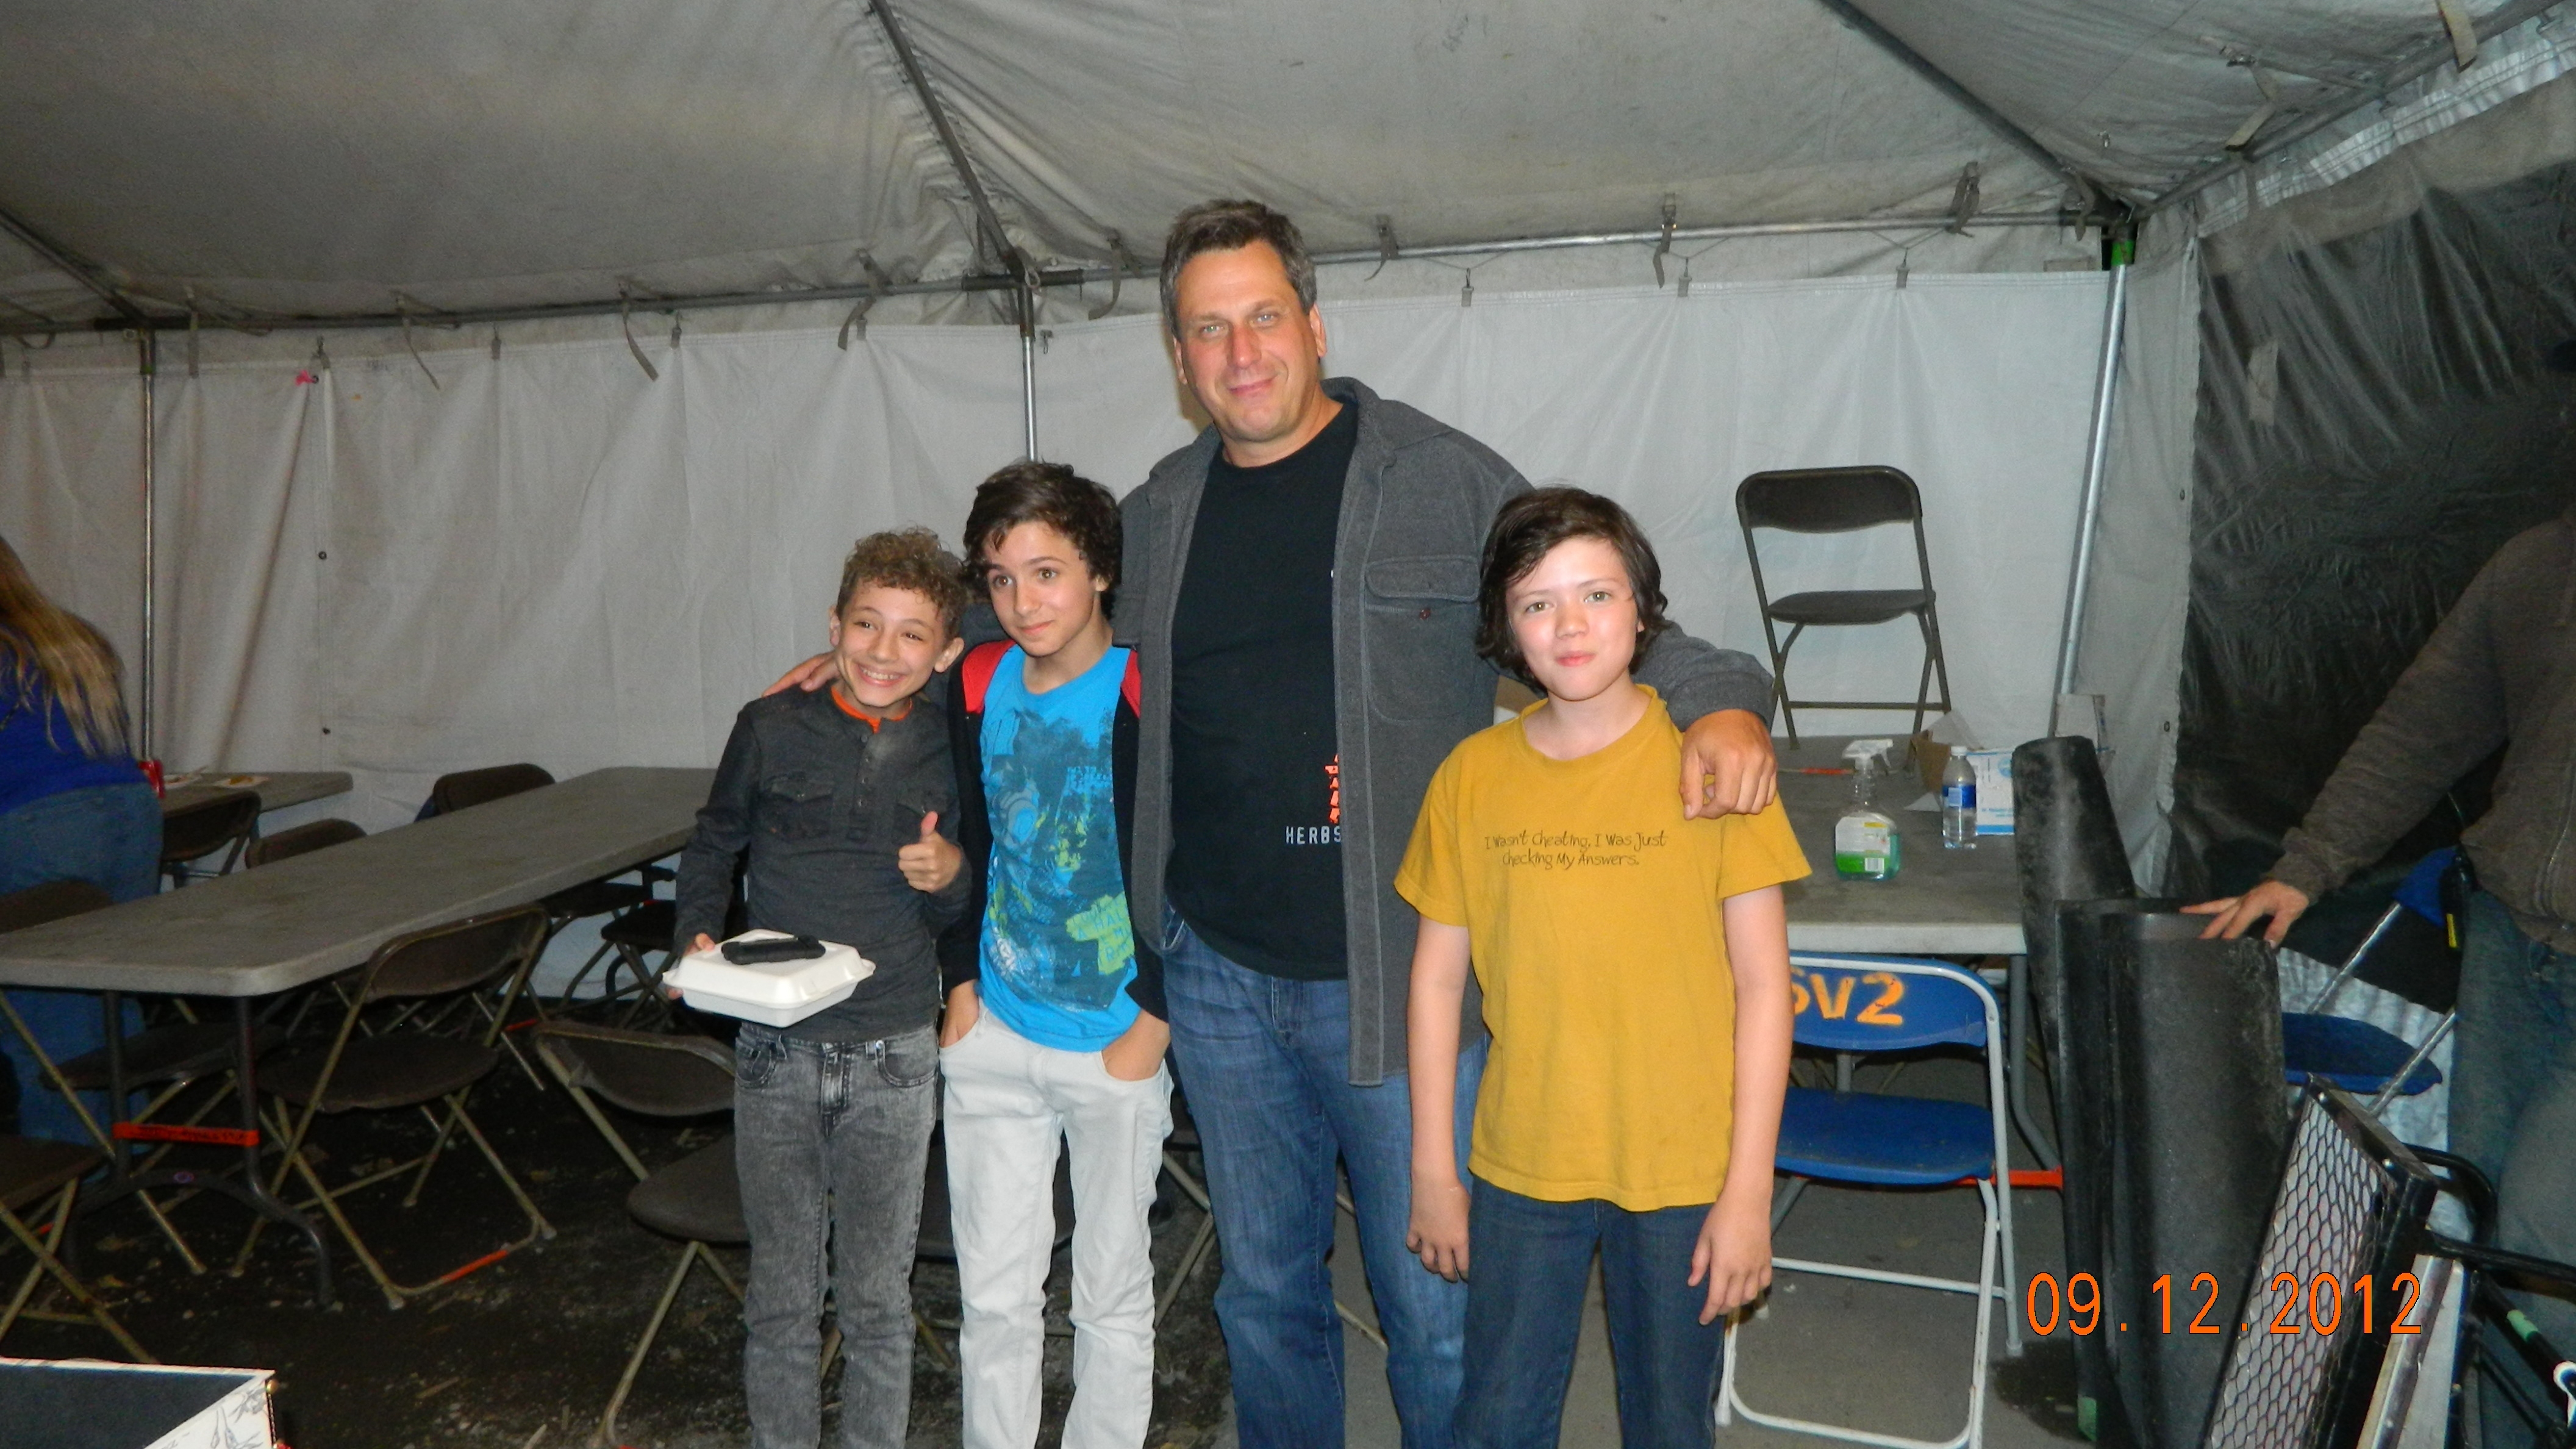 Me (middle/left) with Maxim Knight (left), Director James Marshall (middle), and Nicholas Filipovic (right)on set of Falling Skies Sept. 2012